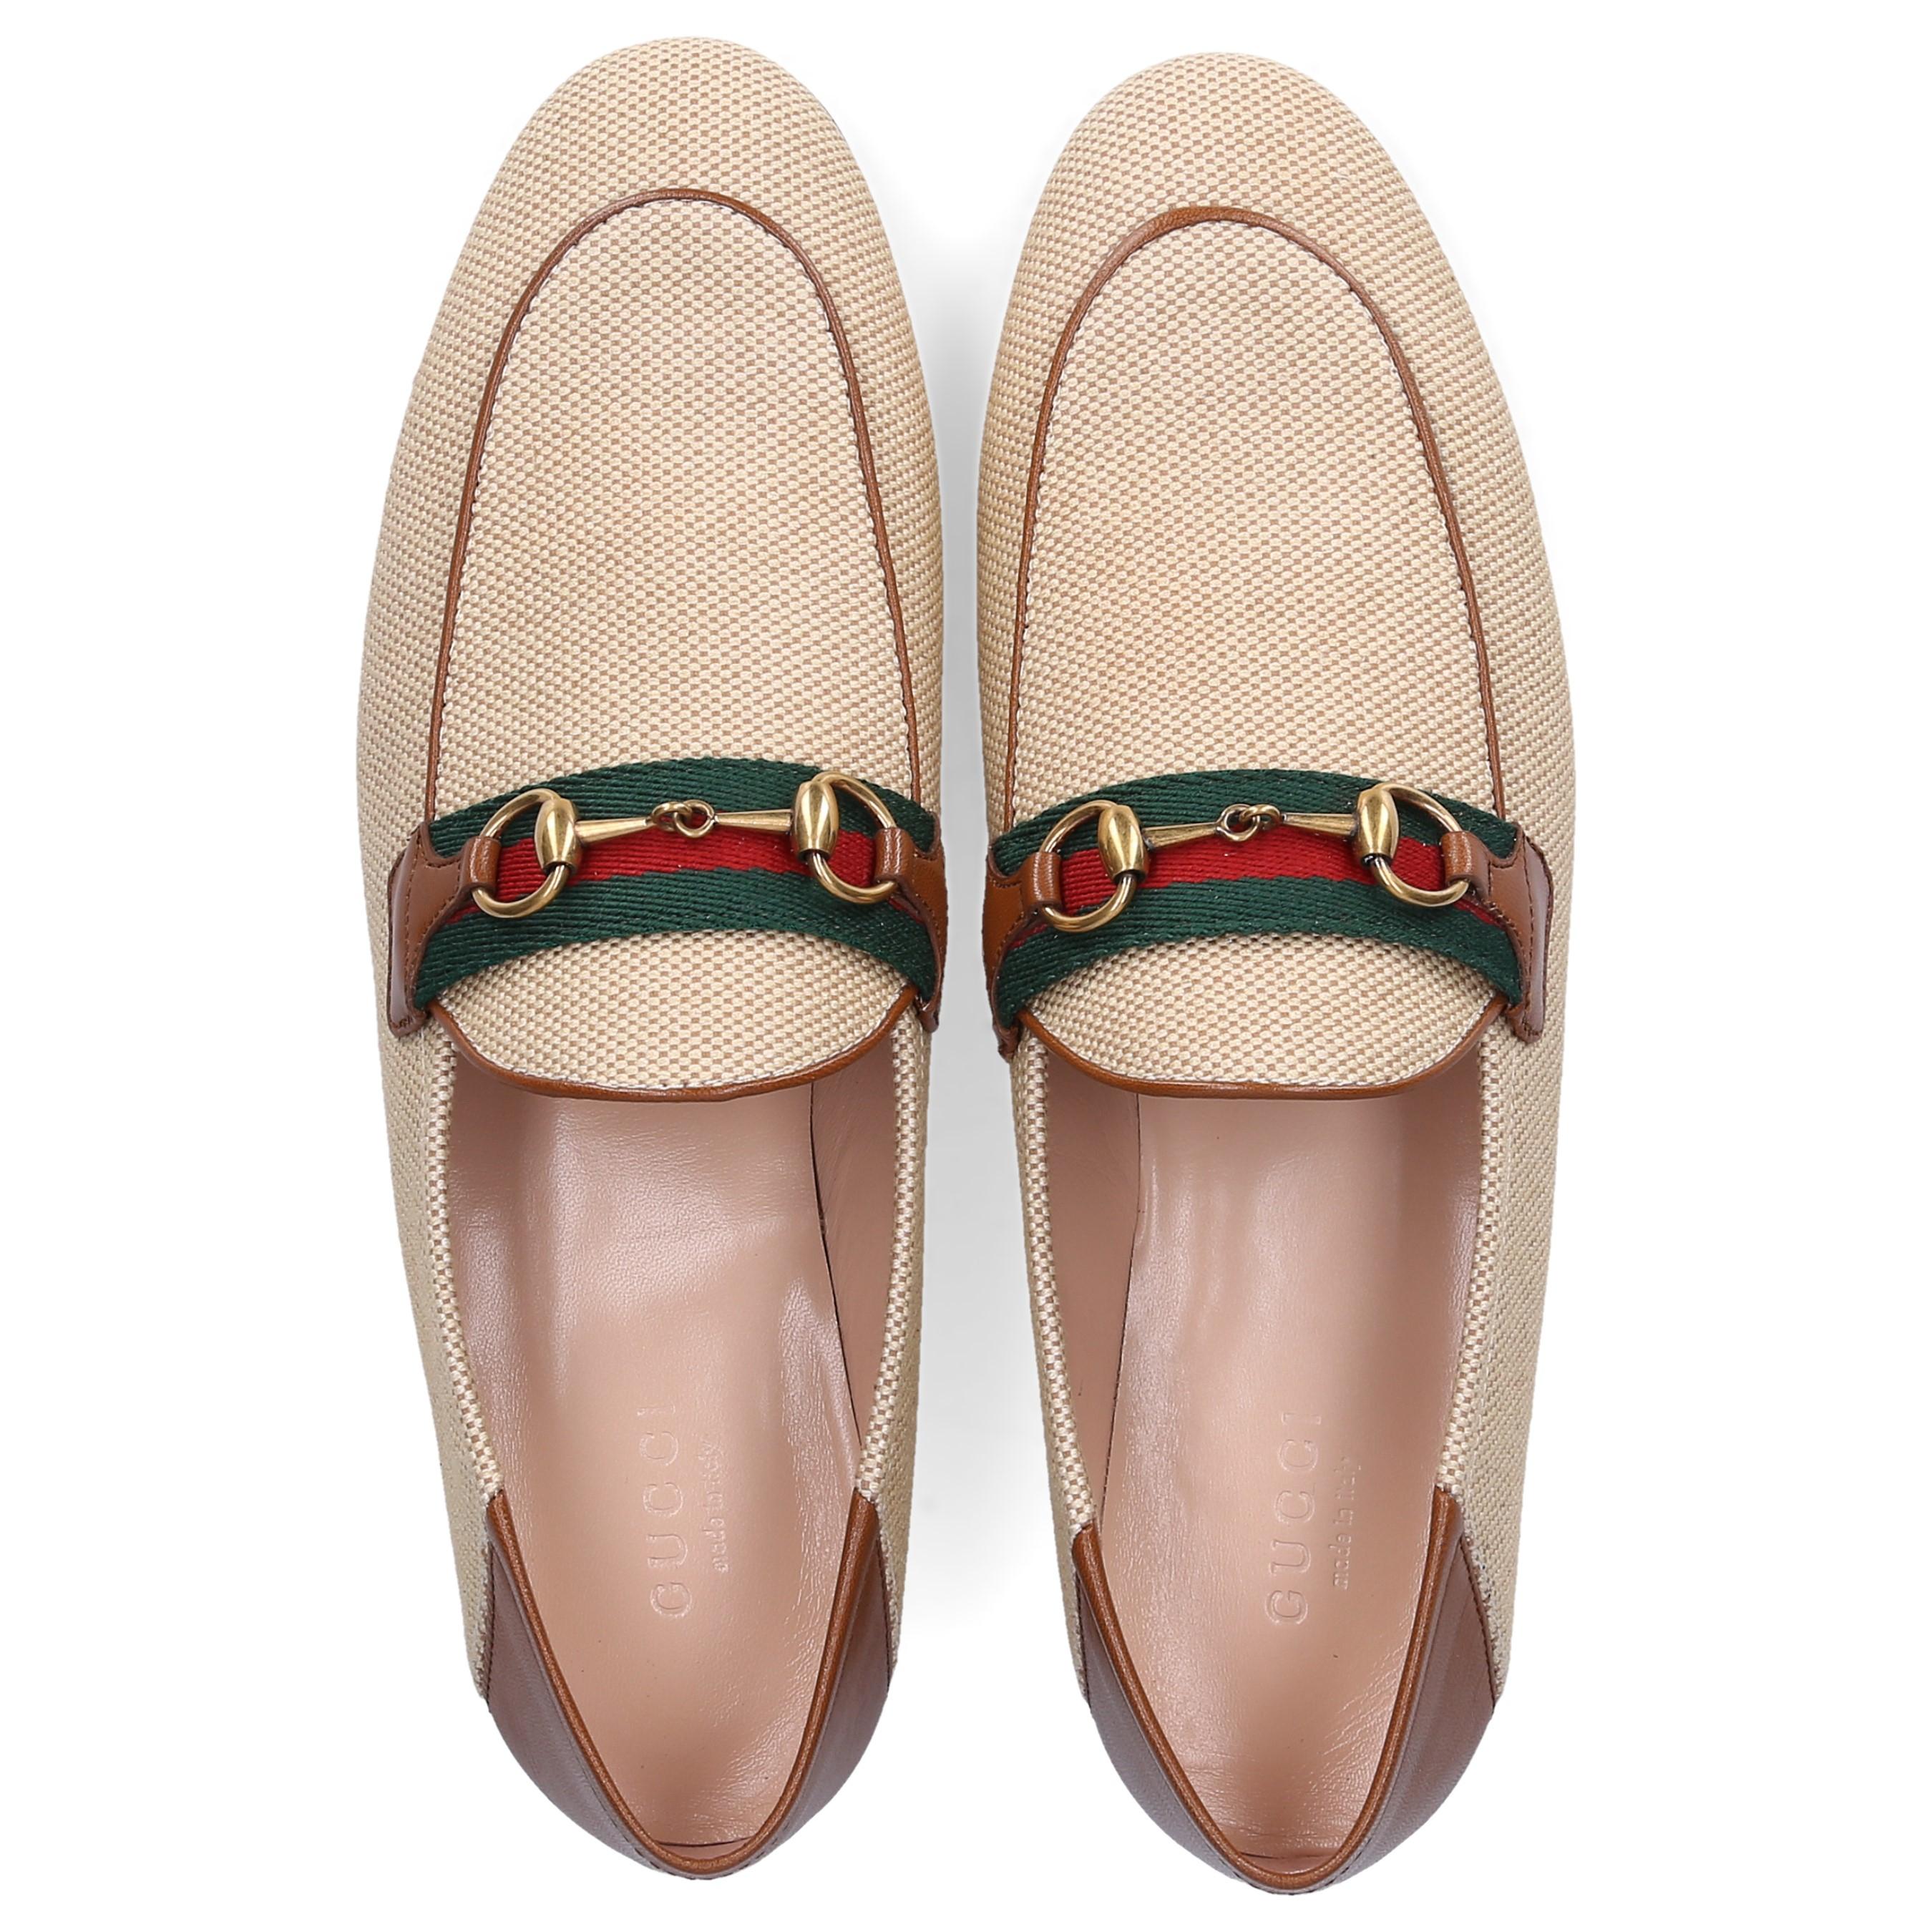 Gucci Slip On Shoes Canvas Charlotte Canvas Logo Metallic Beige in ...